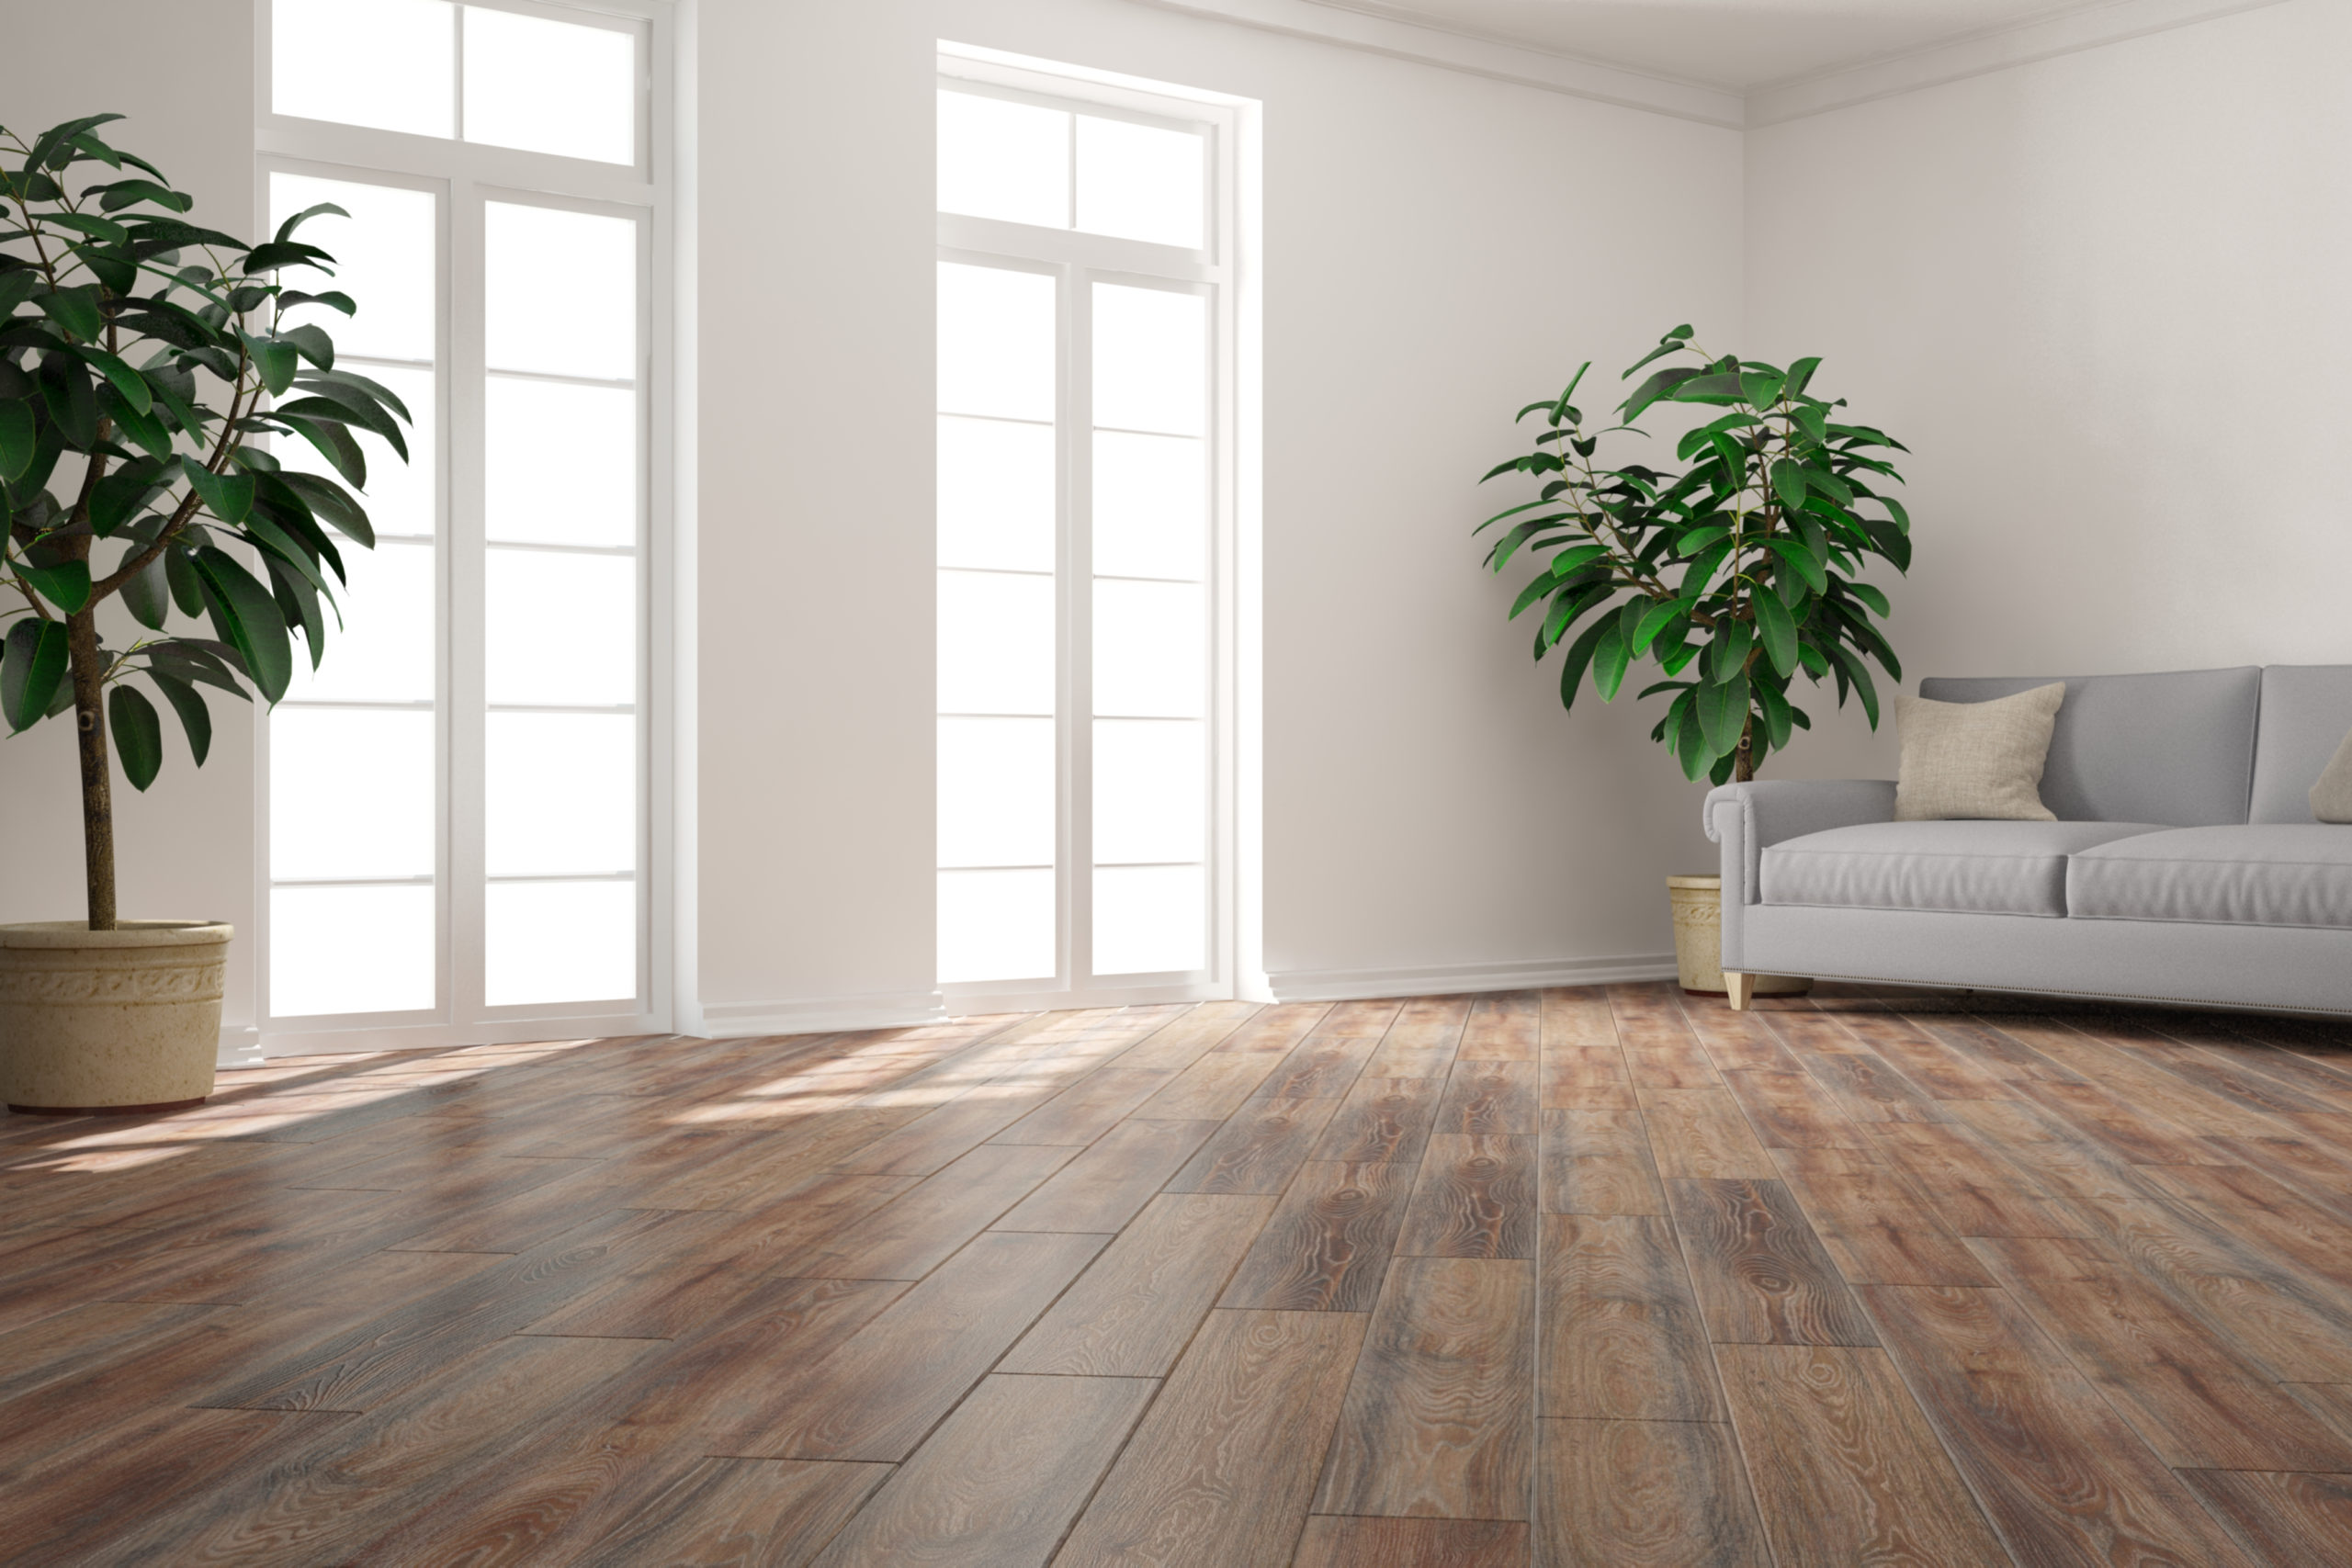 Armstrong Laminate Flooring Review, Armstrong Laminate Flooring Reviews Australia